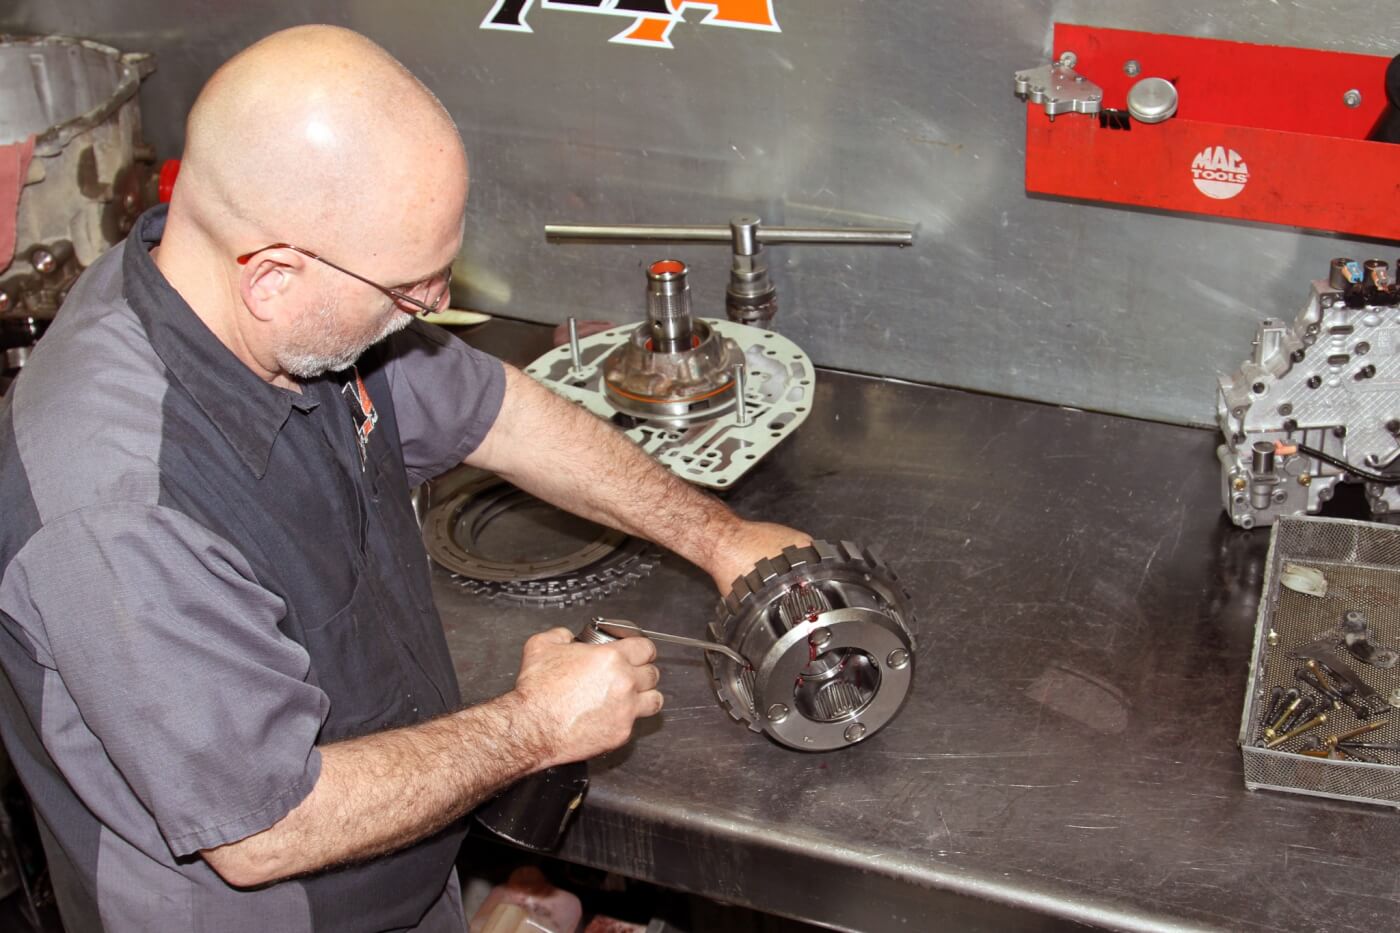 22, 23, 24. He carefully installs and aligns the new clutches and steels as well as the apply pistons and planetary gear sets lubricating the new Torrington bearings along the way.